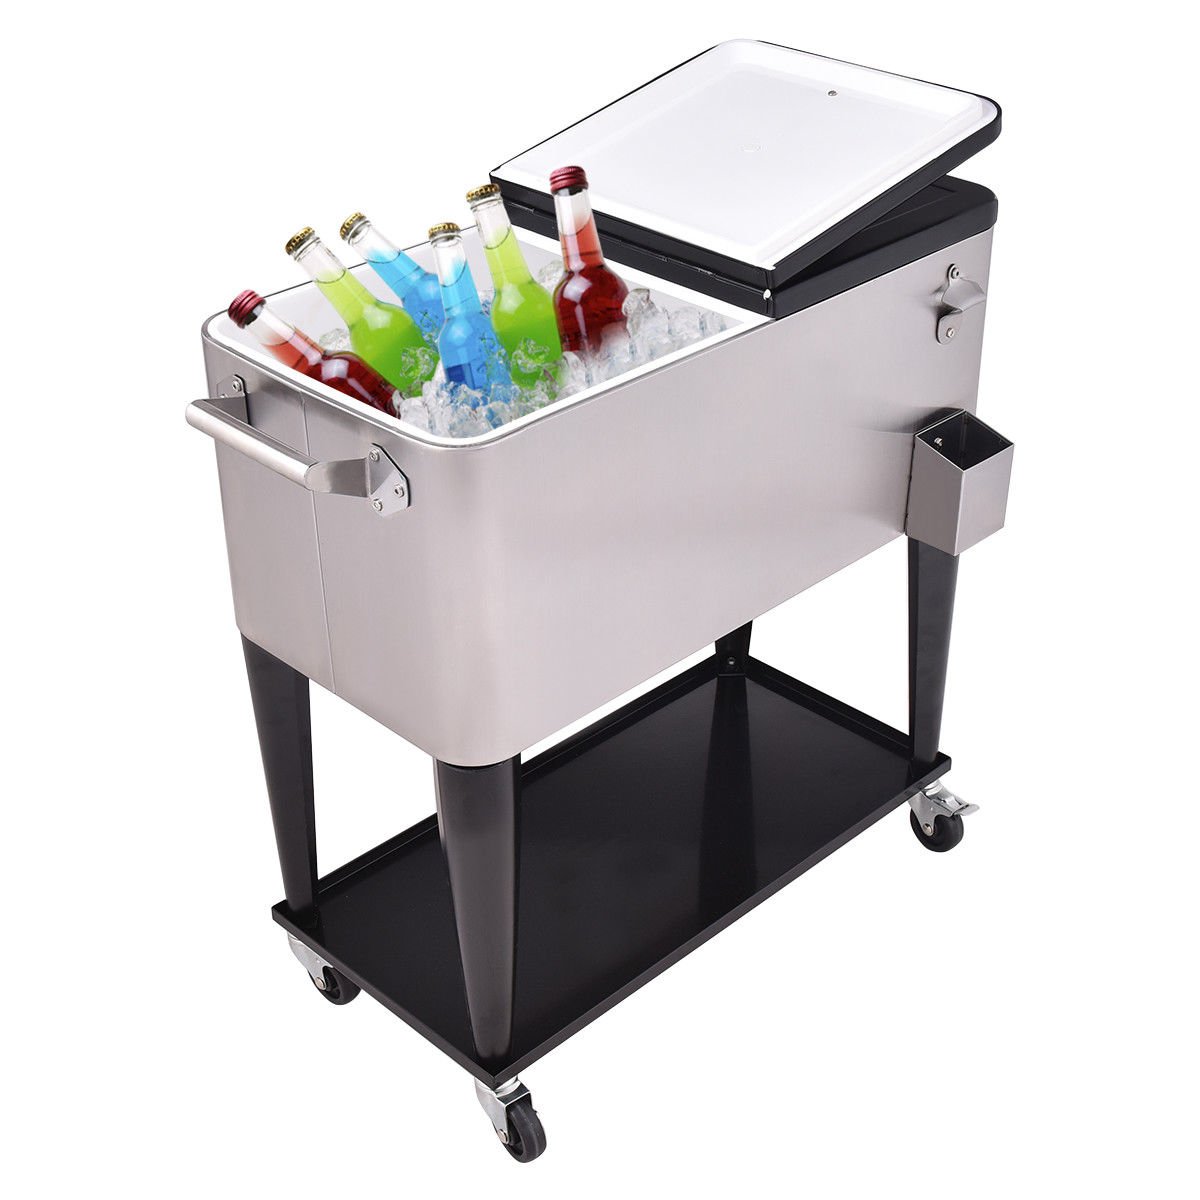 80 Quart Patio Rolling Stainless Steel Ice Beverage Cooler, Gray